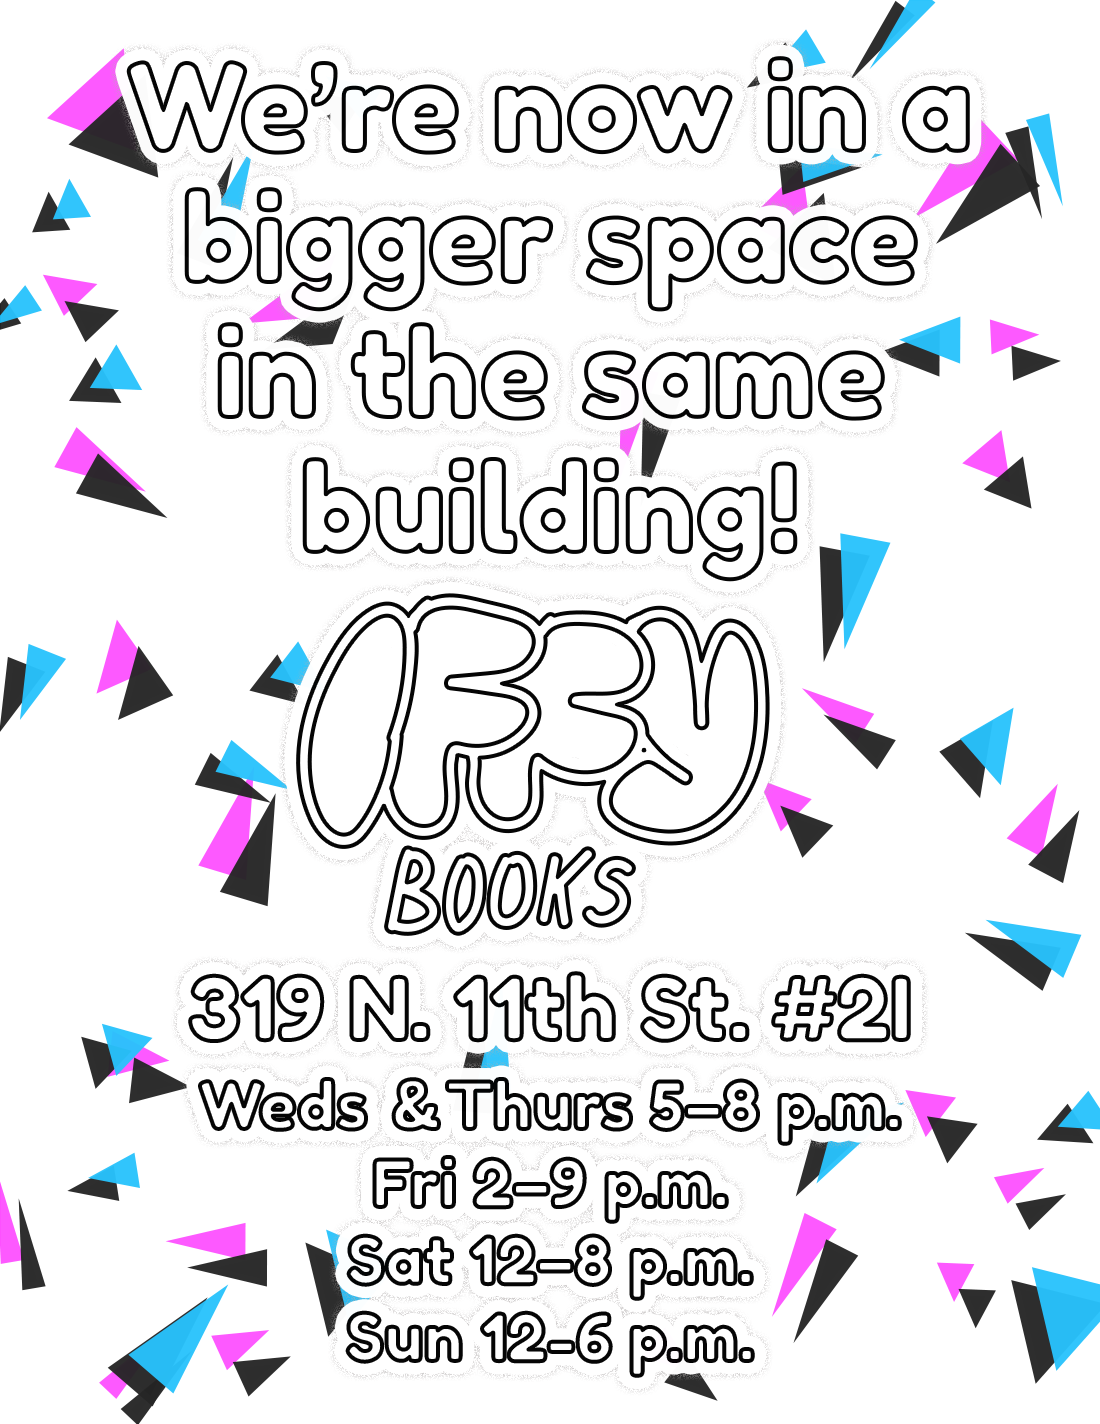 Flyer with pink, blue, and black triangles and the following text: We’re now in a bigger space in the same building! Iffy Books 319 N. 11th St. #2I Weds & Thurs 5–8 p.m. Fri 2–9 p.m. Sat 12–8 p.m. Sun 12-6 p.m.